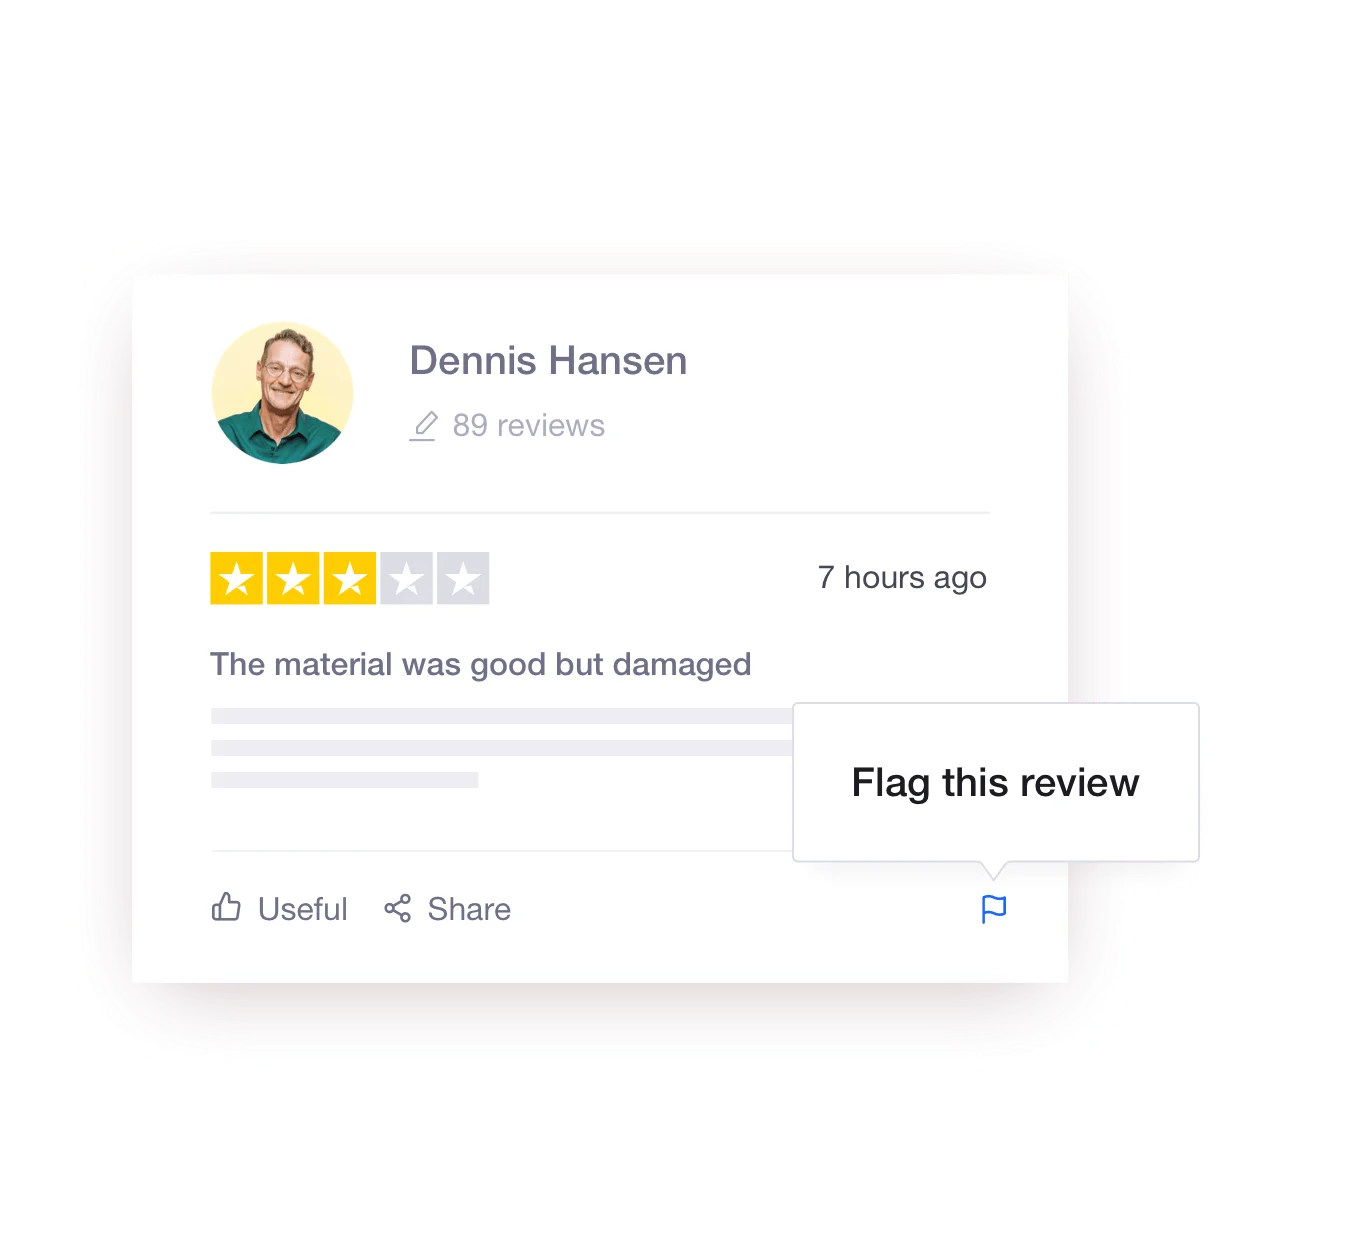 Trustpilot's review flagging functionality